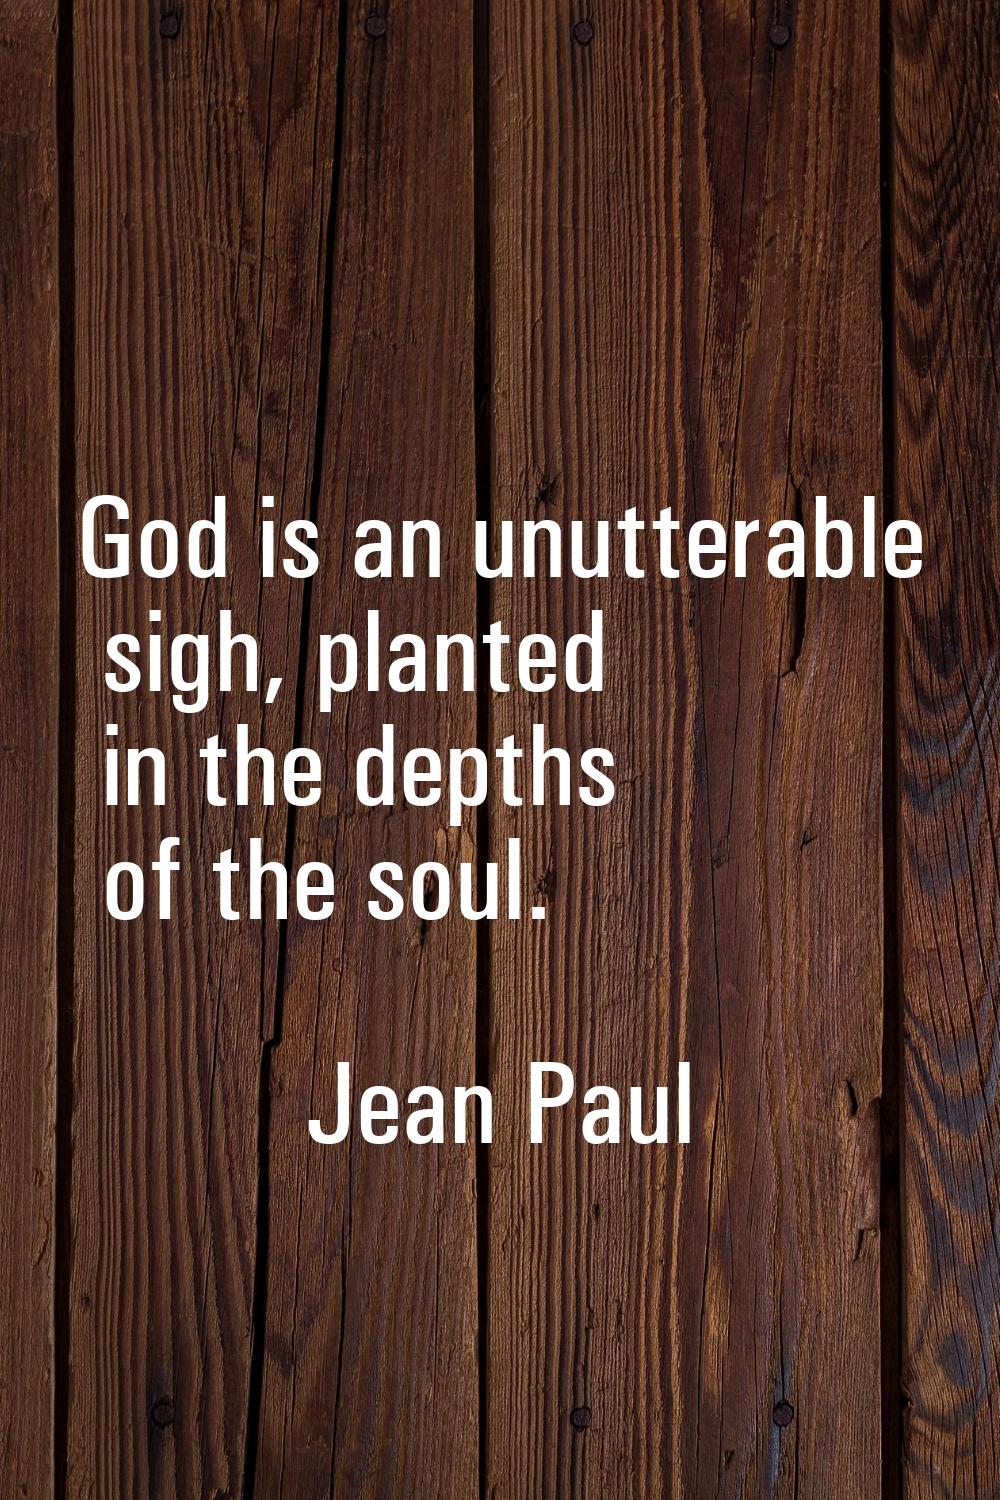 God is an unutterable sigh, planted in the depths of the soul.